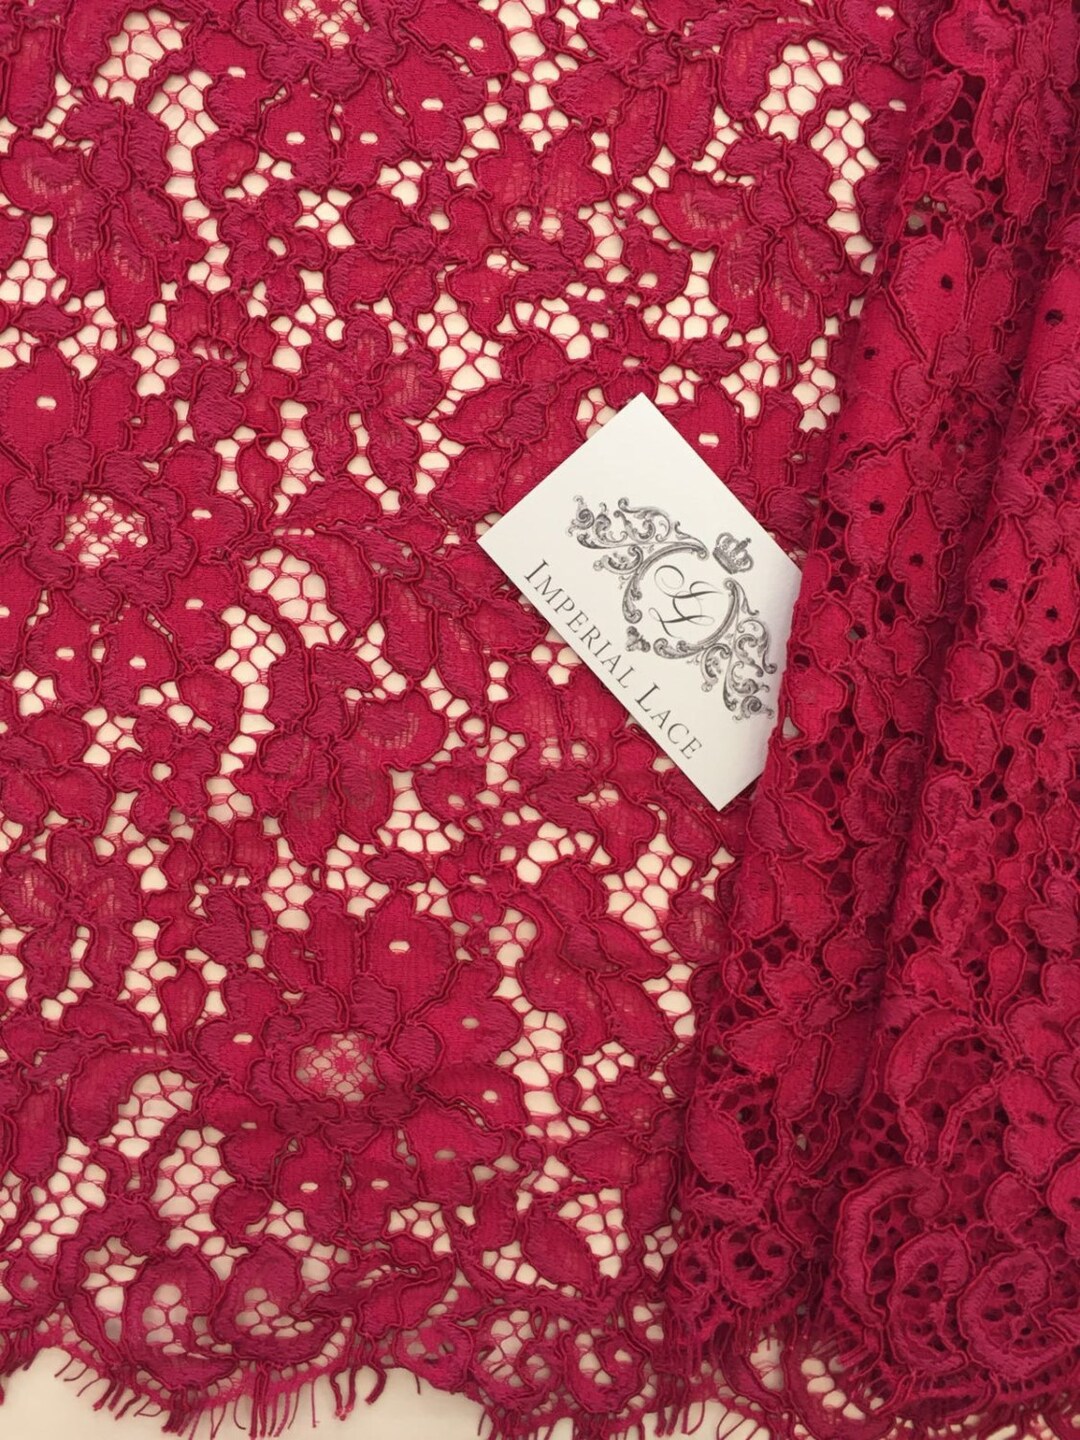 Burgundy Lace Fabric Red Lace French Lace Embroidered Lace - Etsy